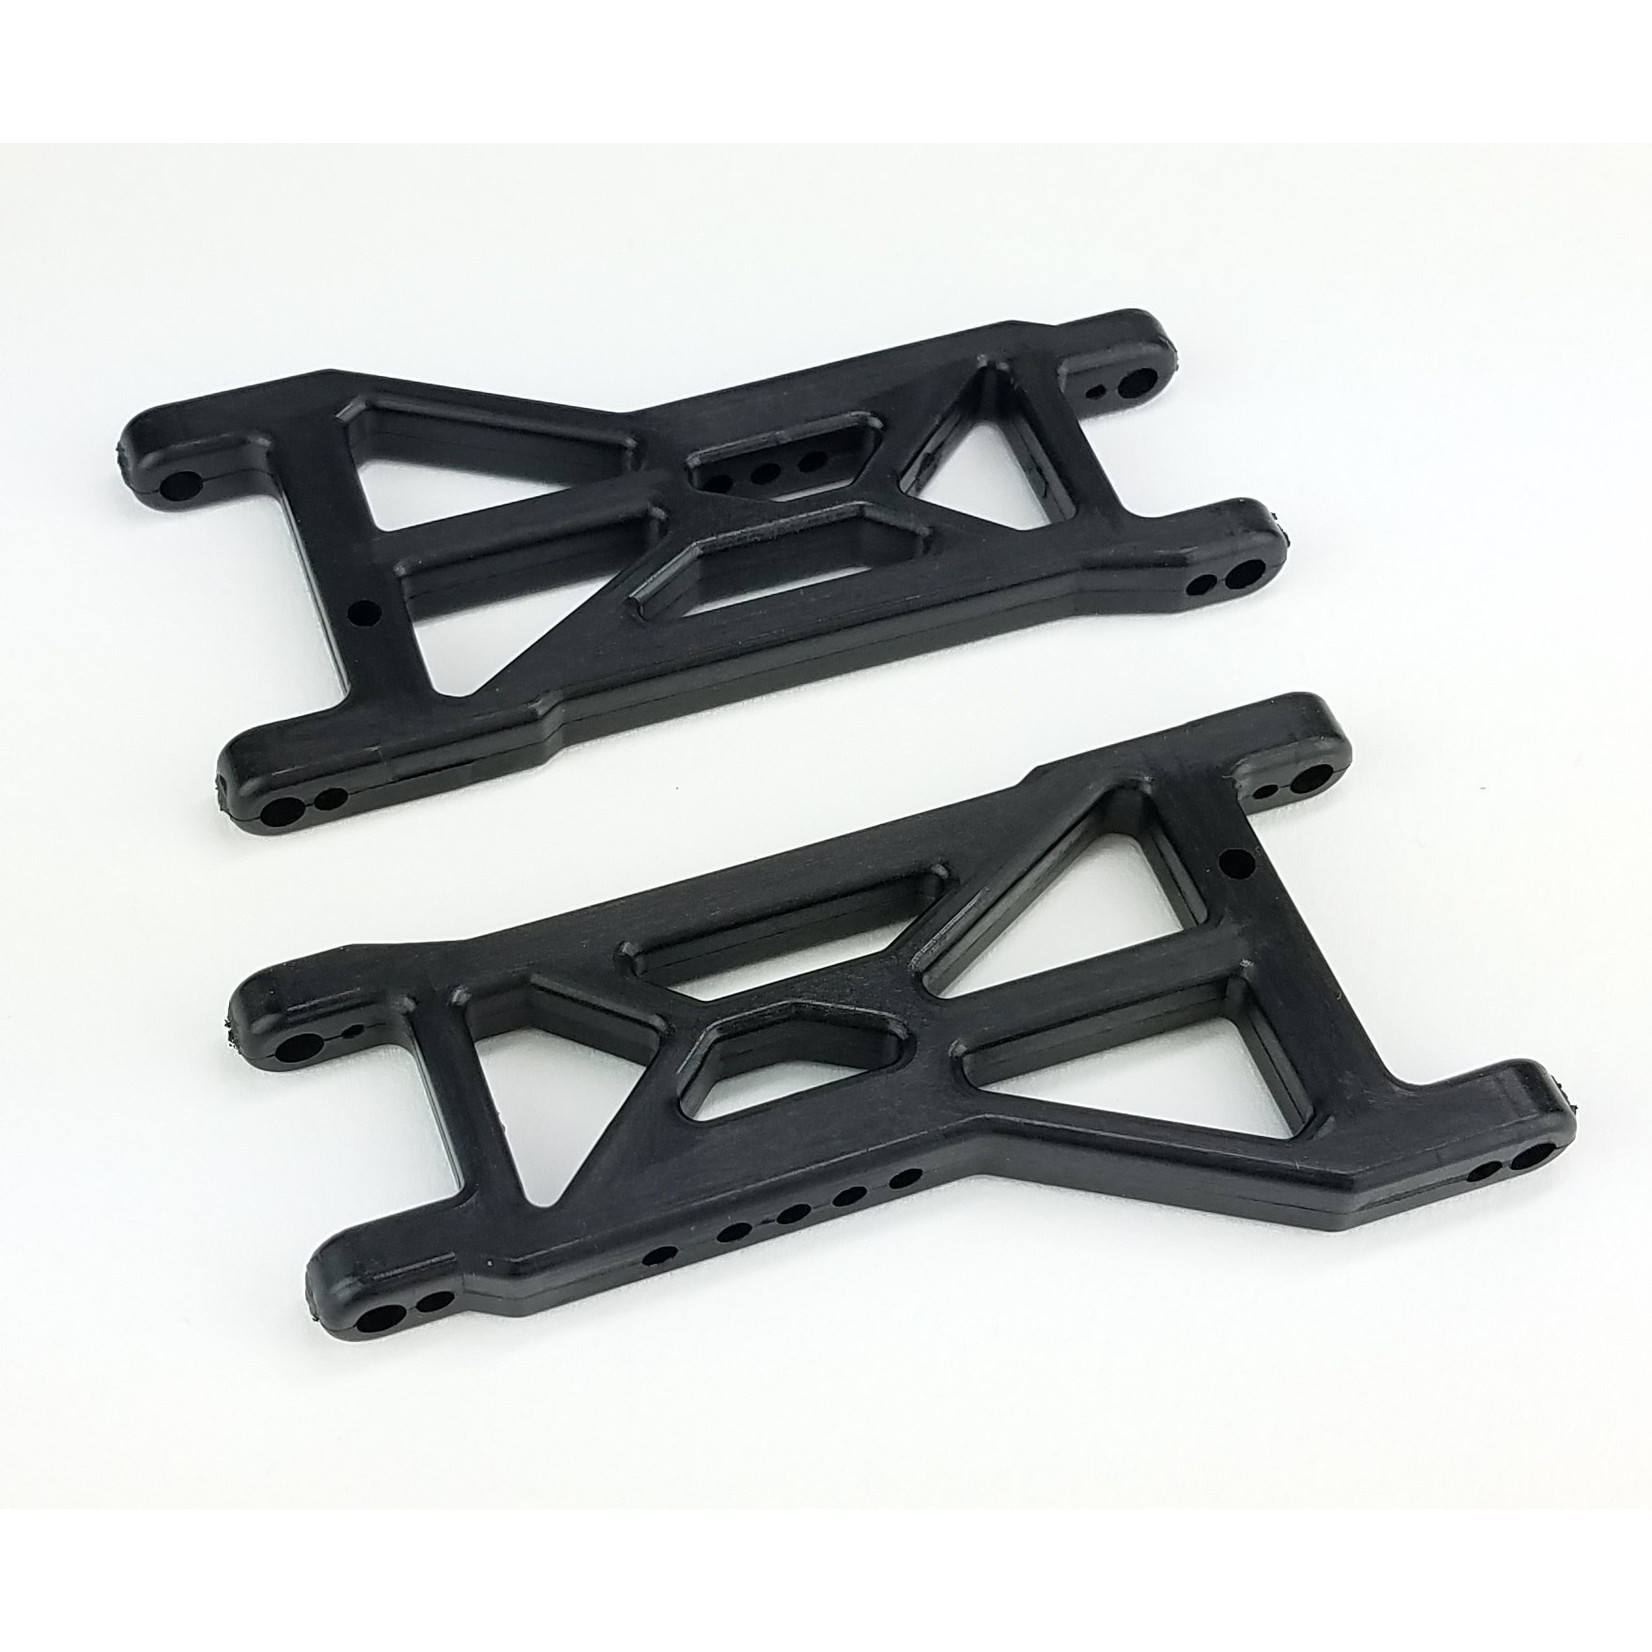 Custom Works RC Products CW3253 Custom Works Wide Front Suspension Arms